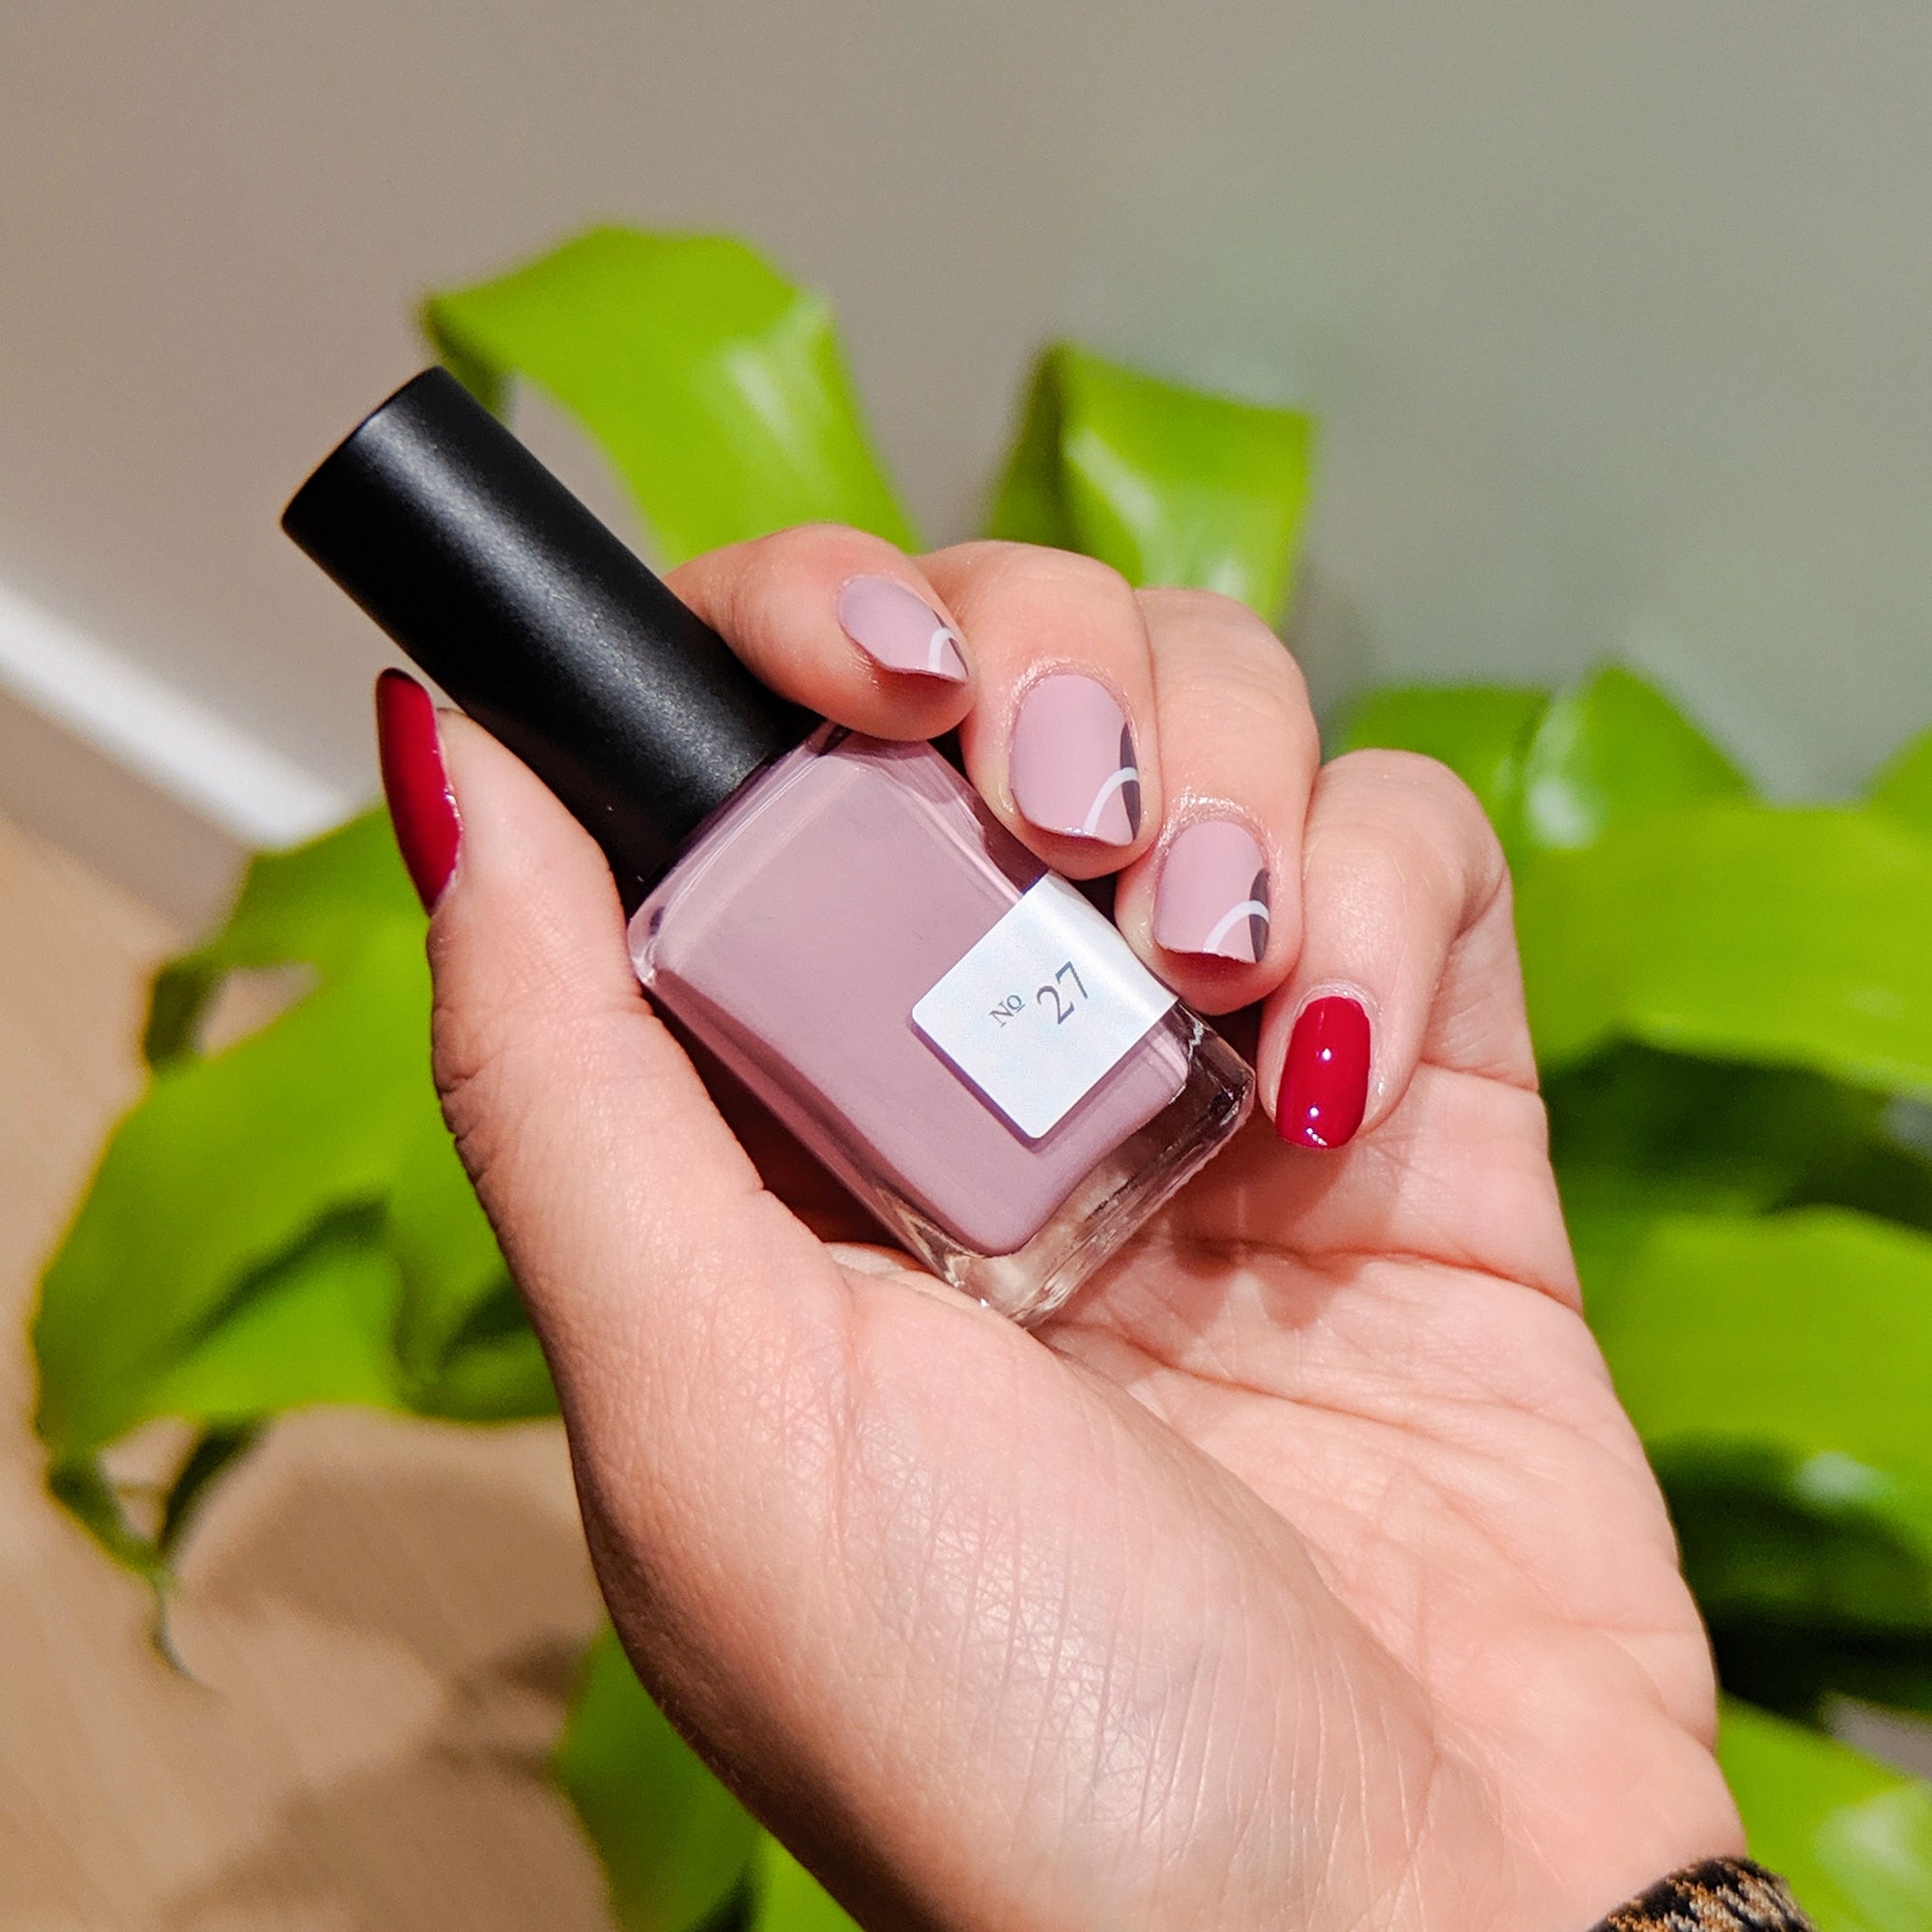 33 Ideas For Summer Nails - Brit + Co